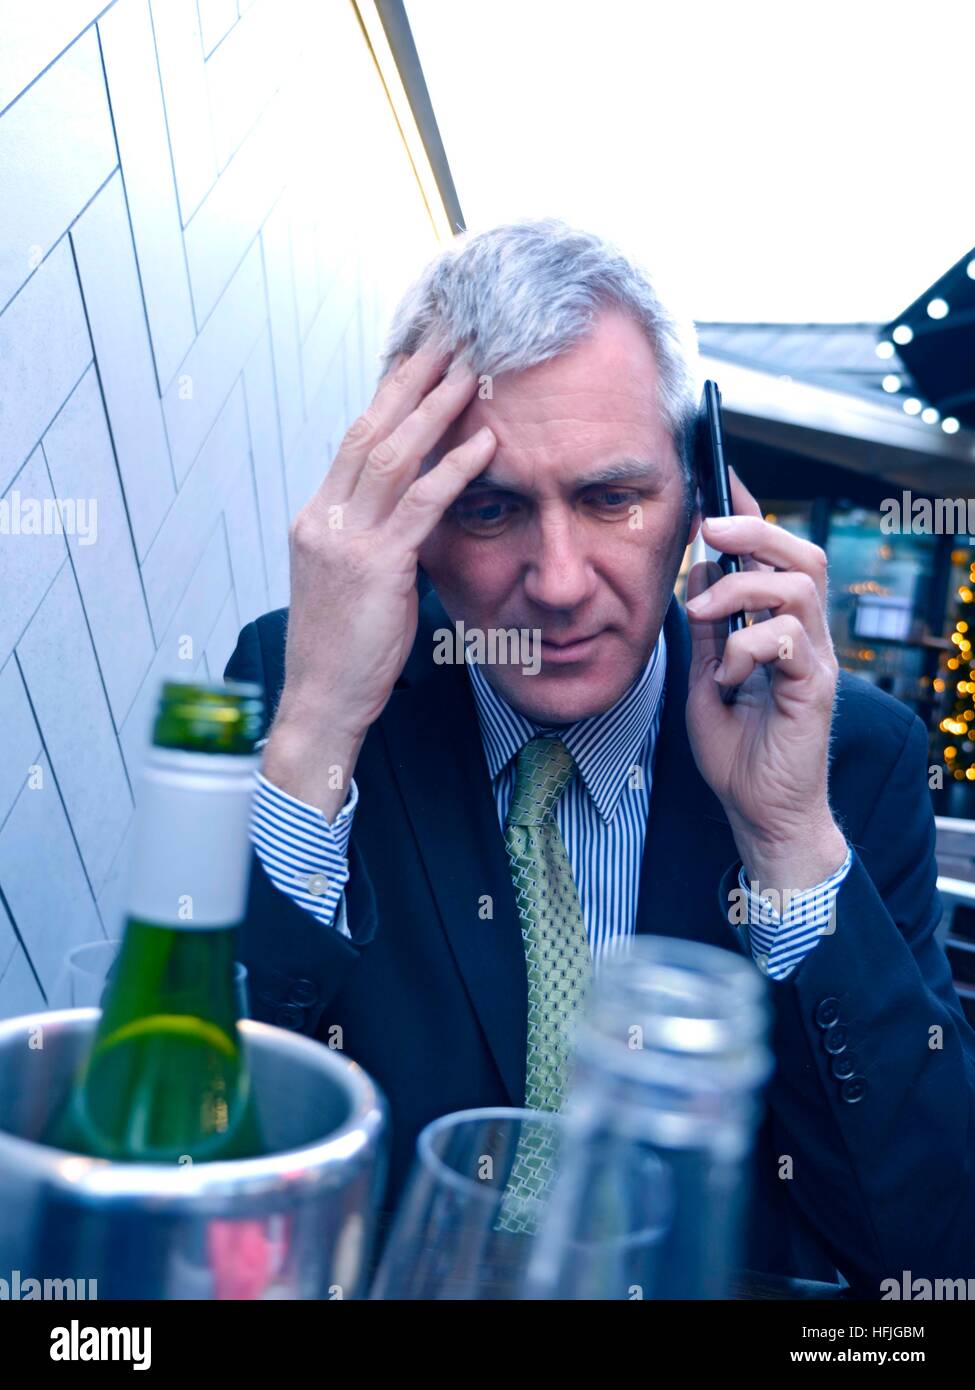 Businessman with alcoholic drinks on table looking worried, bad news, pensive, concerned, listening on his smartphone  iPhone 7 plus mobile telephone at alfresco drinks  bar restaurant table with alcohol wine bottles and glass in foreground Stock Photo